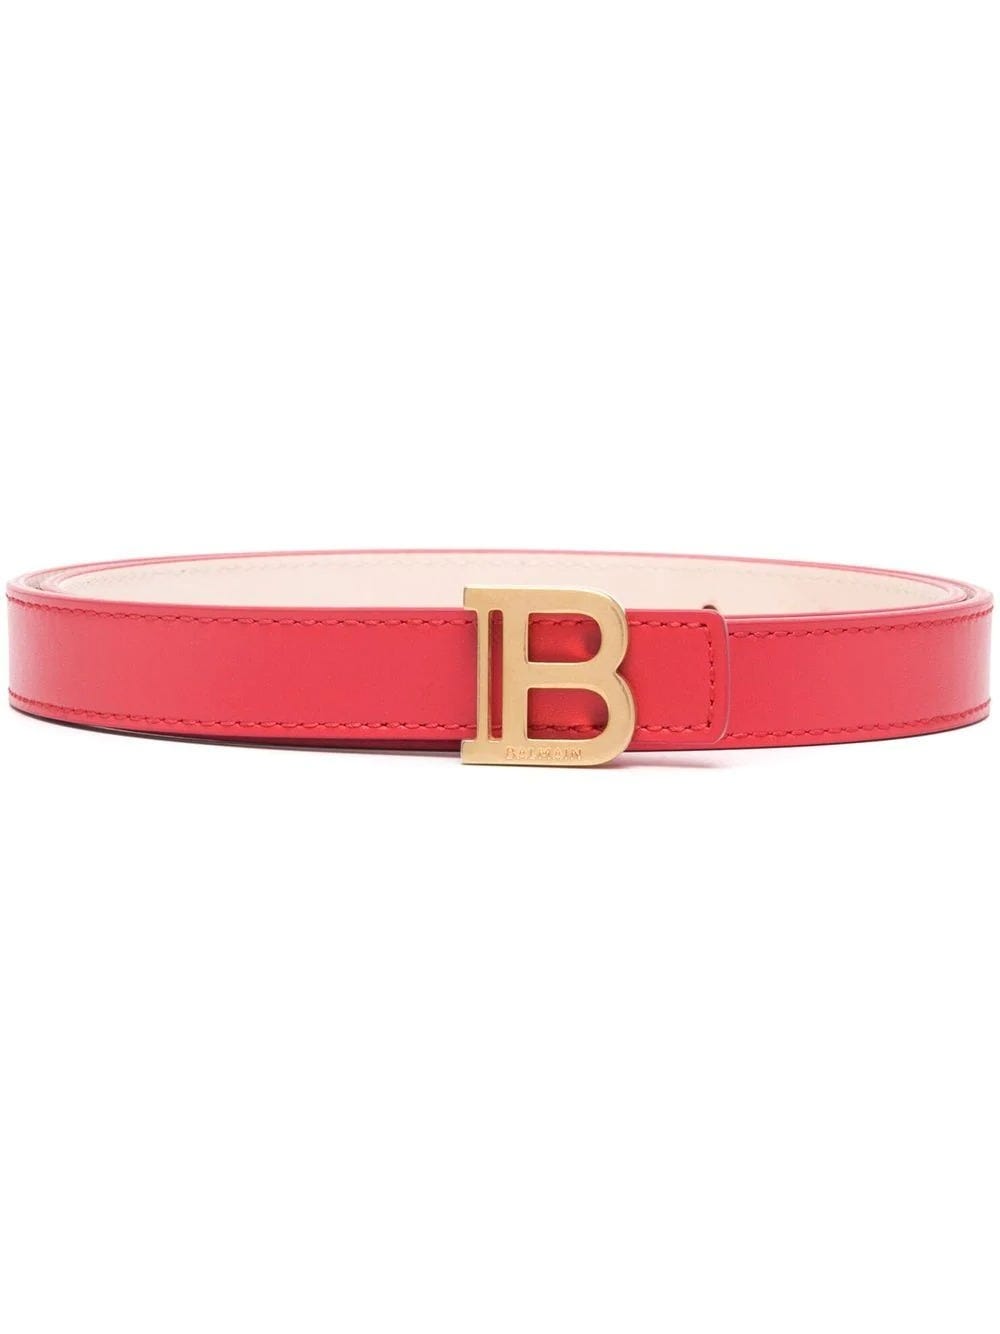 BALMAIN RED LEATHER BELT WITH LOGO BUCKLE